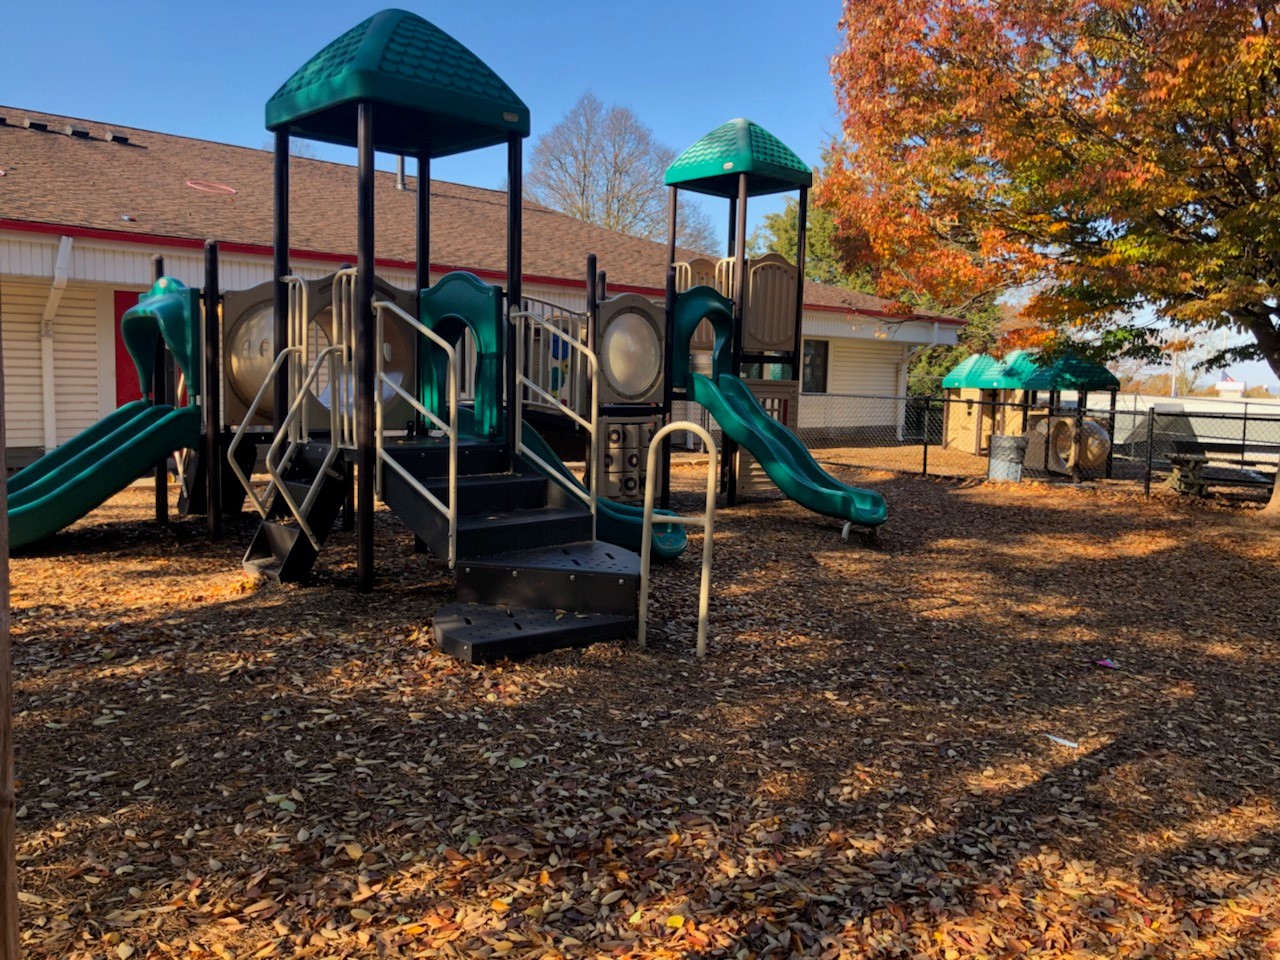 Sterling Park KinderCare Playground